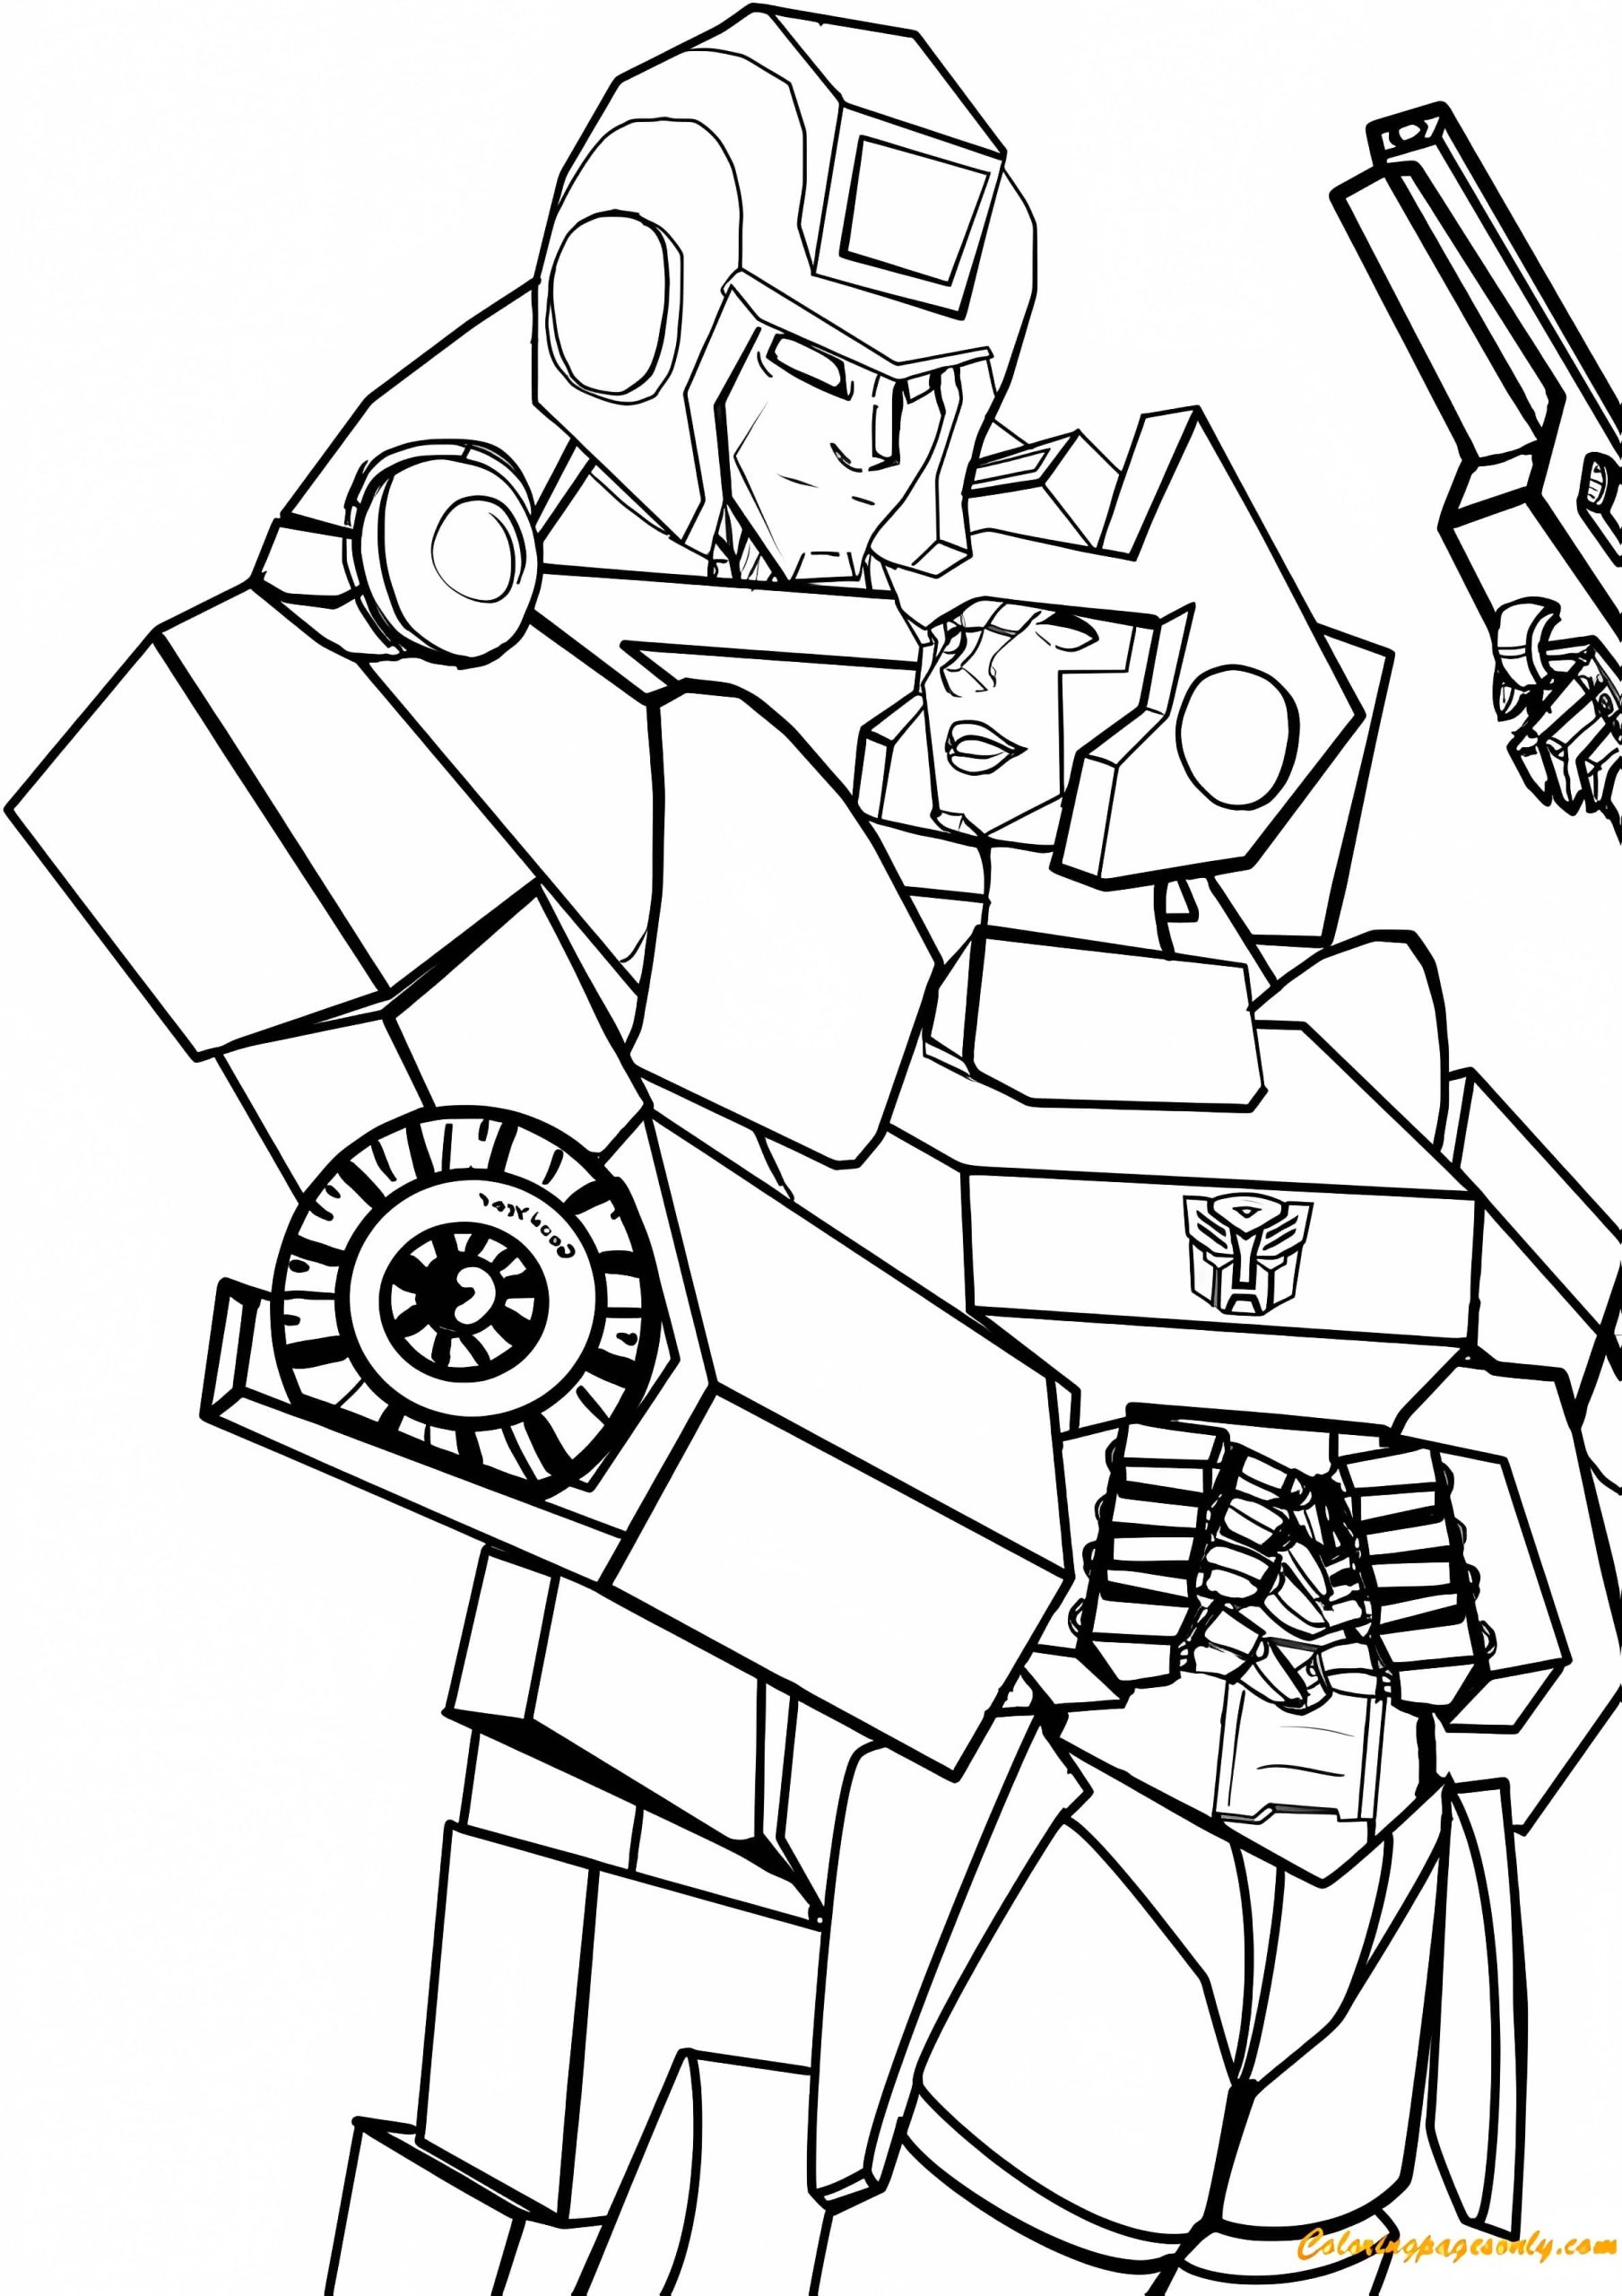 Transformers Love Coloring Pages